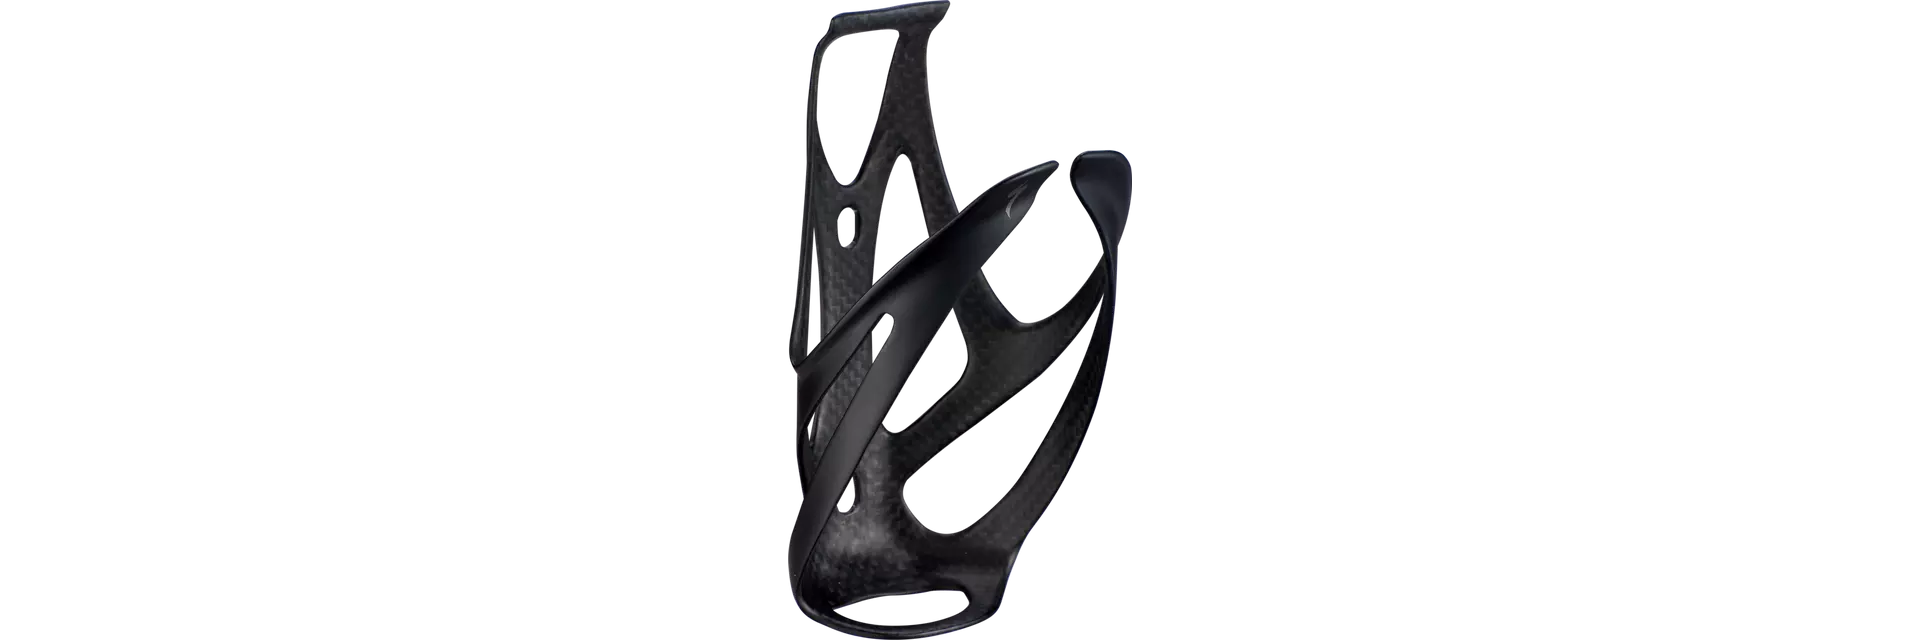 Specialized S-Works Carbon Rib Cage III